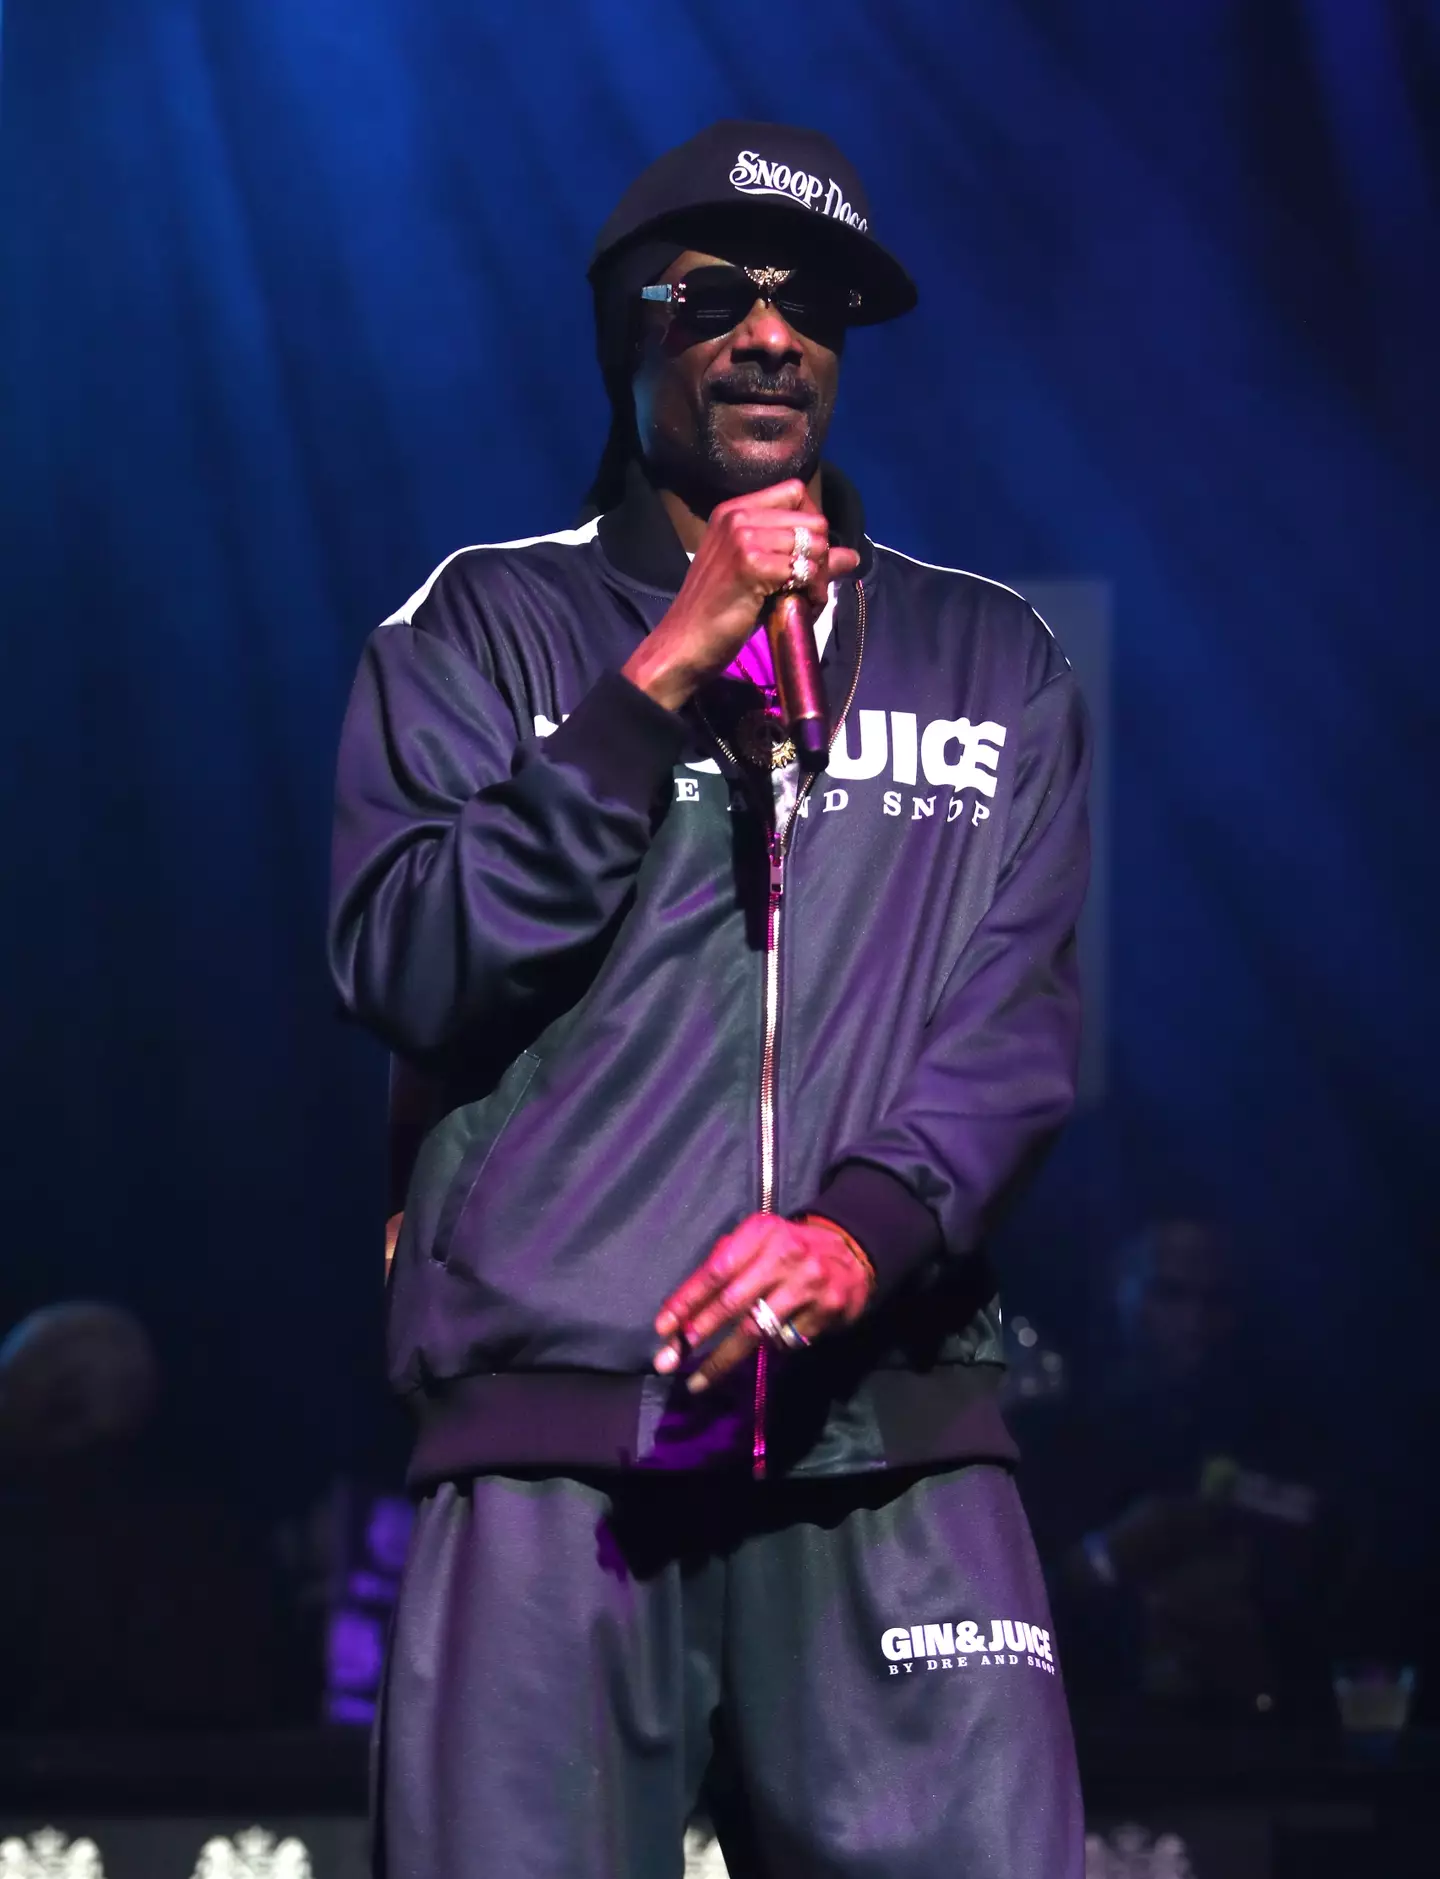 One of Snoop Dogg's songs recently hit one billion streams on Spotify.